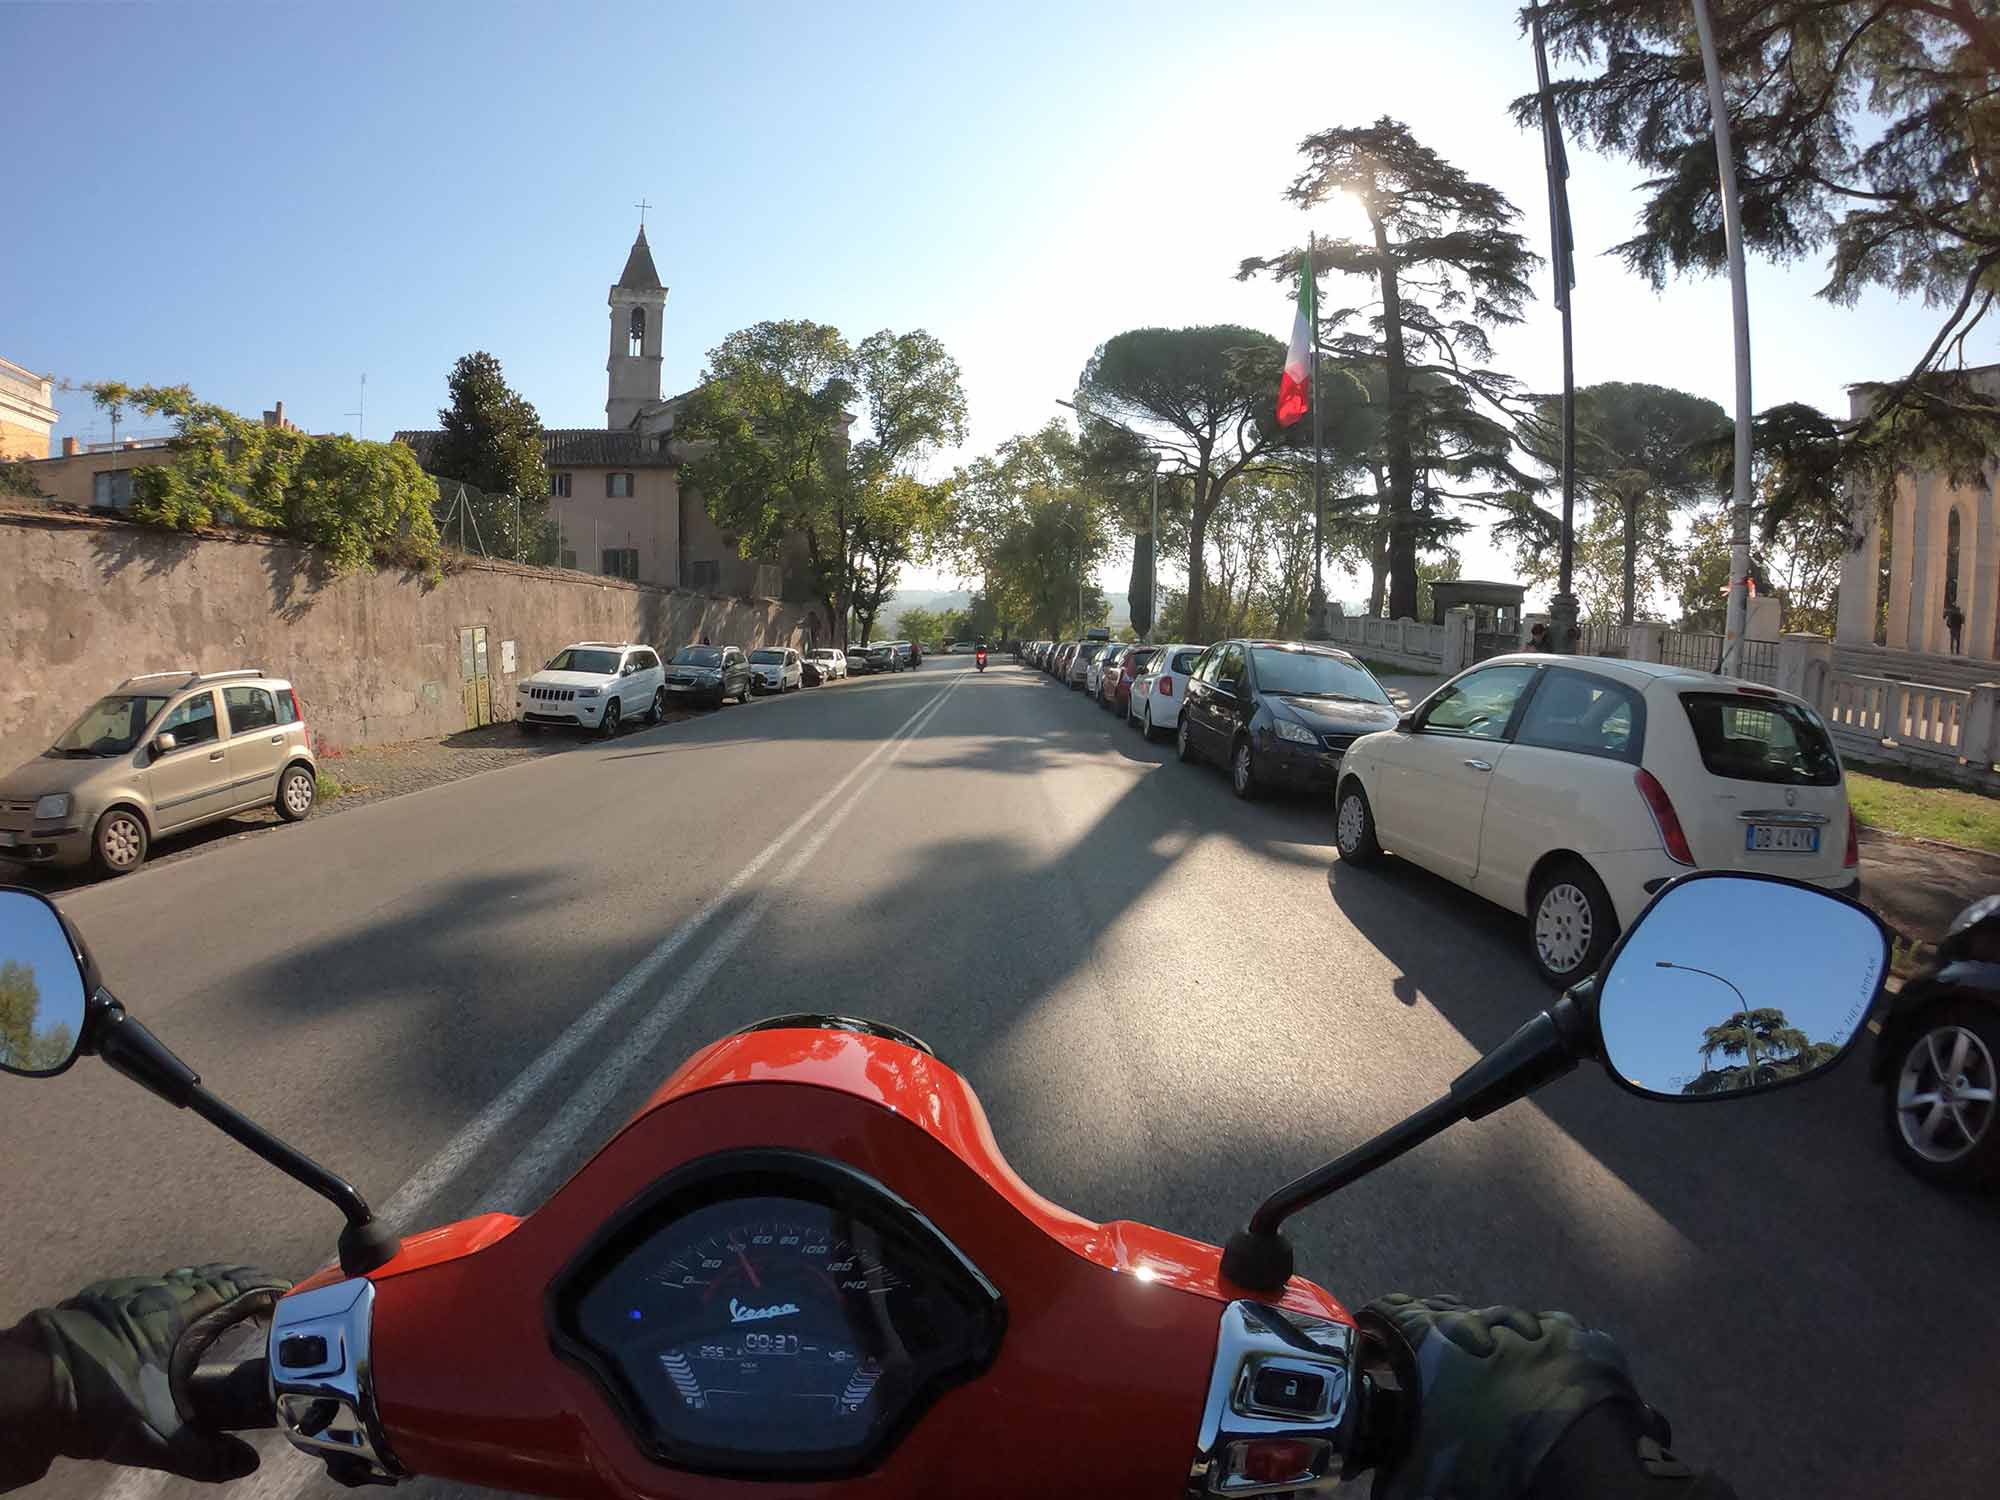 With their friendly-riding dynamic (no shifting), scooters are a great way to see and smell the sights and sounds of town.